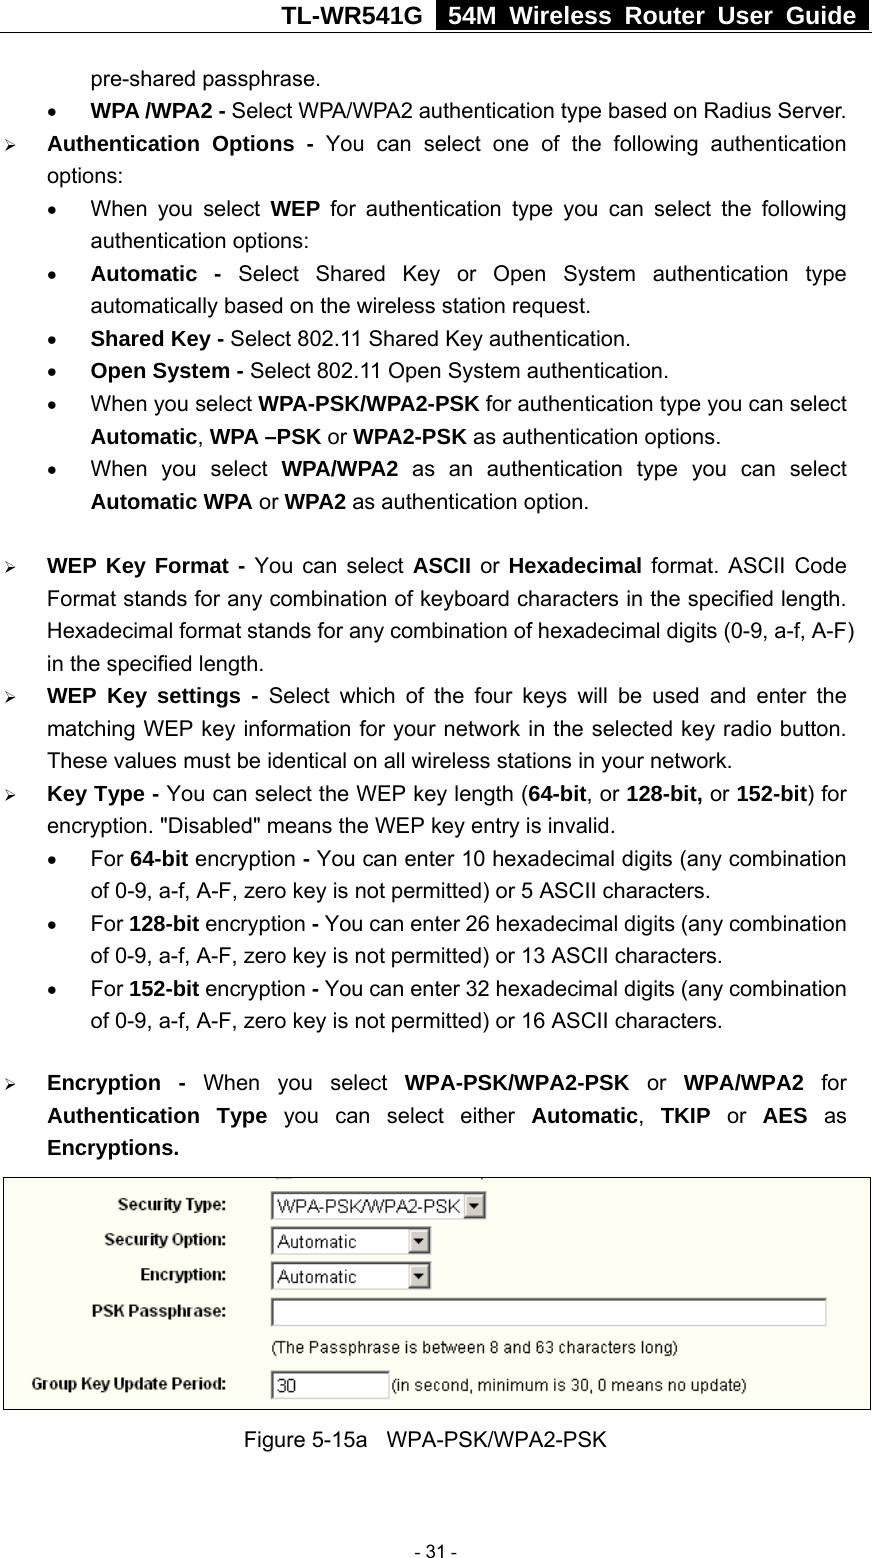 TL-WR541G   54M Wireless Router User Guide  pre-shared passphrase.   • WPA /WPA2 - Select WPA/WPA2 authentication type based on Radius Server. ¾ Authentication Options - You can select one of the following authentication options:  • When you select WEP for authentication type you can select the following authentication options: • Automatic - Select Shared Key or Open System authentication type automatically based on the wireless station request. • Shared Key - Select 802.11 Shared Key authentication. • Open System - Select 802.11 Open System authentication. • When you select WPA-PSK/WPA2-PSK for authentication type you can select Automatic, WPA –PSK or WPA2-PSK as authentication options. • When you select WPA/WPA2 as an authentication type you can select Automatic WPA or WPA2 as authentication option.  ¾ WEP Key Format - You can select ASCII or  Hexadecimal format. ASCII Code Format stands for any combination of keyboard characters in the specified length. Hexadecimal format stands for any combination of hexadecimal digits (0-9, a-f, A-F) in the specified length. ¾ WEP Key settings - Select which of the four keys will be used and enter the matching WEP key information for your network in the selected key radio button. These values must be identical on all wireless stations in your network. ¾ Key Type - You can select the WEP key length (64-bit, or 128-bit, or 152-bit) for encryption. &quot;Disabled&quot; means the WEP key entry is invalid. • For 64-bit encryption - You can enter 10 hexadecimal digits (any combination of 0-9, a-f, A-F, zero key is not permitted) or 5 ASCII characters.   • For 128-bit encryption - You can enter 26 hexadecimal digits (any combination of 0-9, a-f, A-F, zero key is not permitted) or 13 ASCII characters. • For 152-bit encryption - You can enter 32 hexadecimal digits (any combination of 0-9, a-f, A-F, zero key is not permitted) or 16 ASCII characters. ¾ Encryption - When you select WPA-PSK/WPA2-PSK or WPA/WPA2 for Authentication Type you can select either Automatic, TKIP or AES as Encryptions.  Figure 5-15a  WPA-PSK/WPA2-PSK  - 31 - 